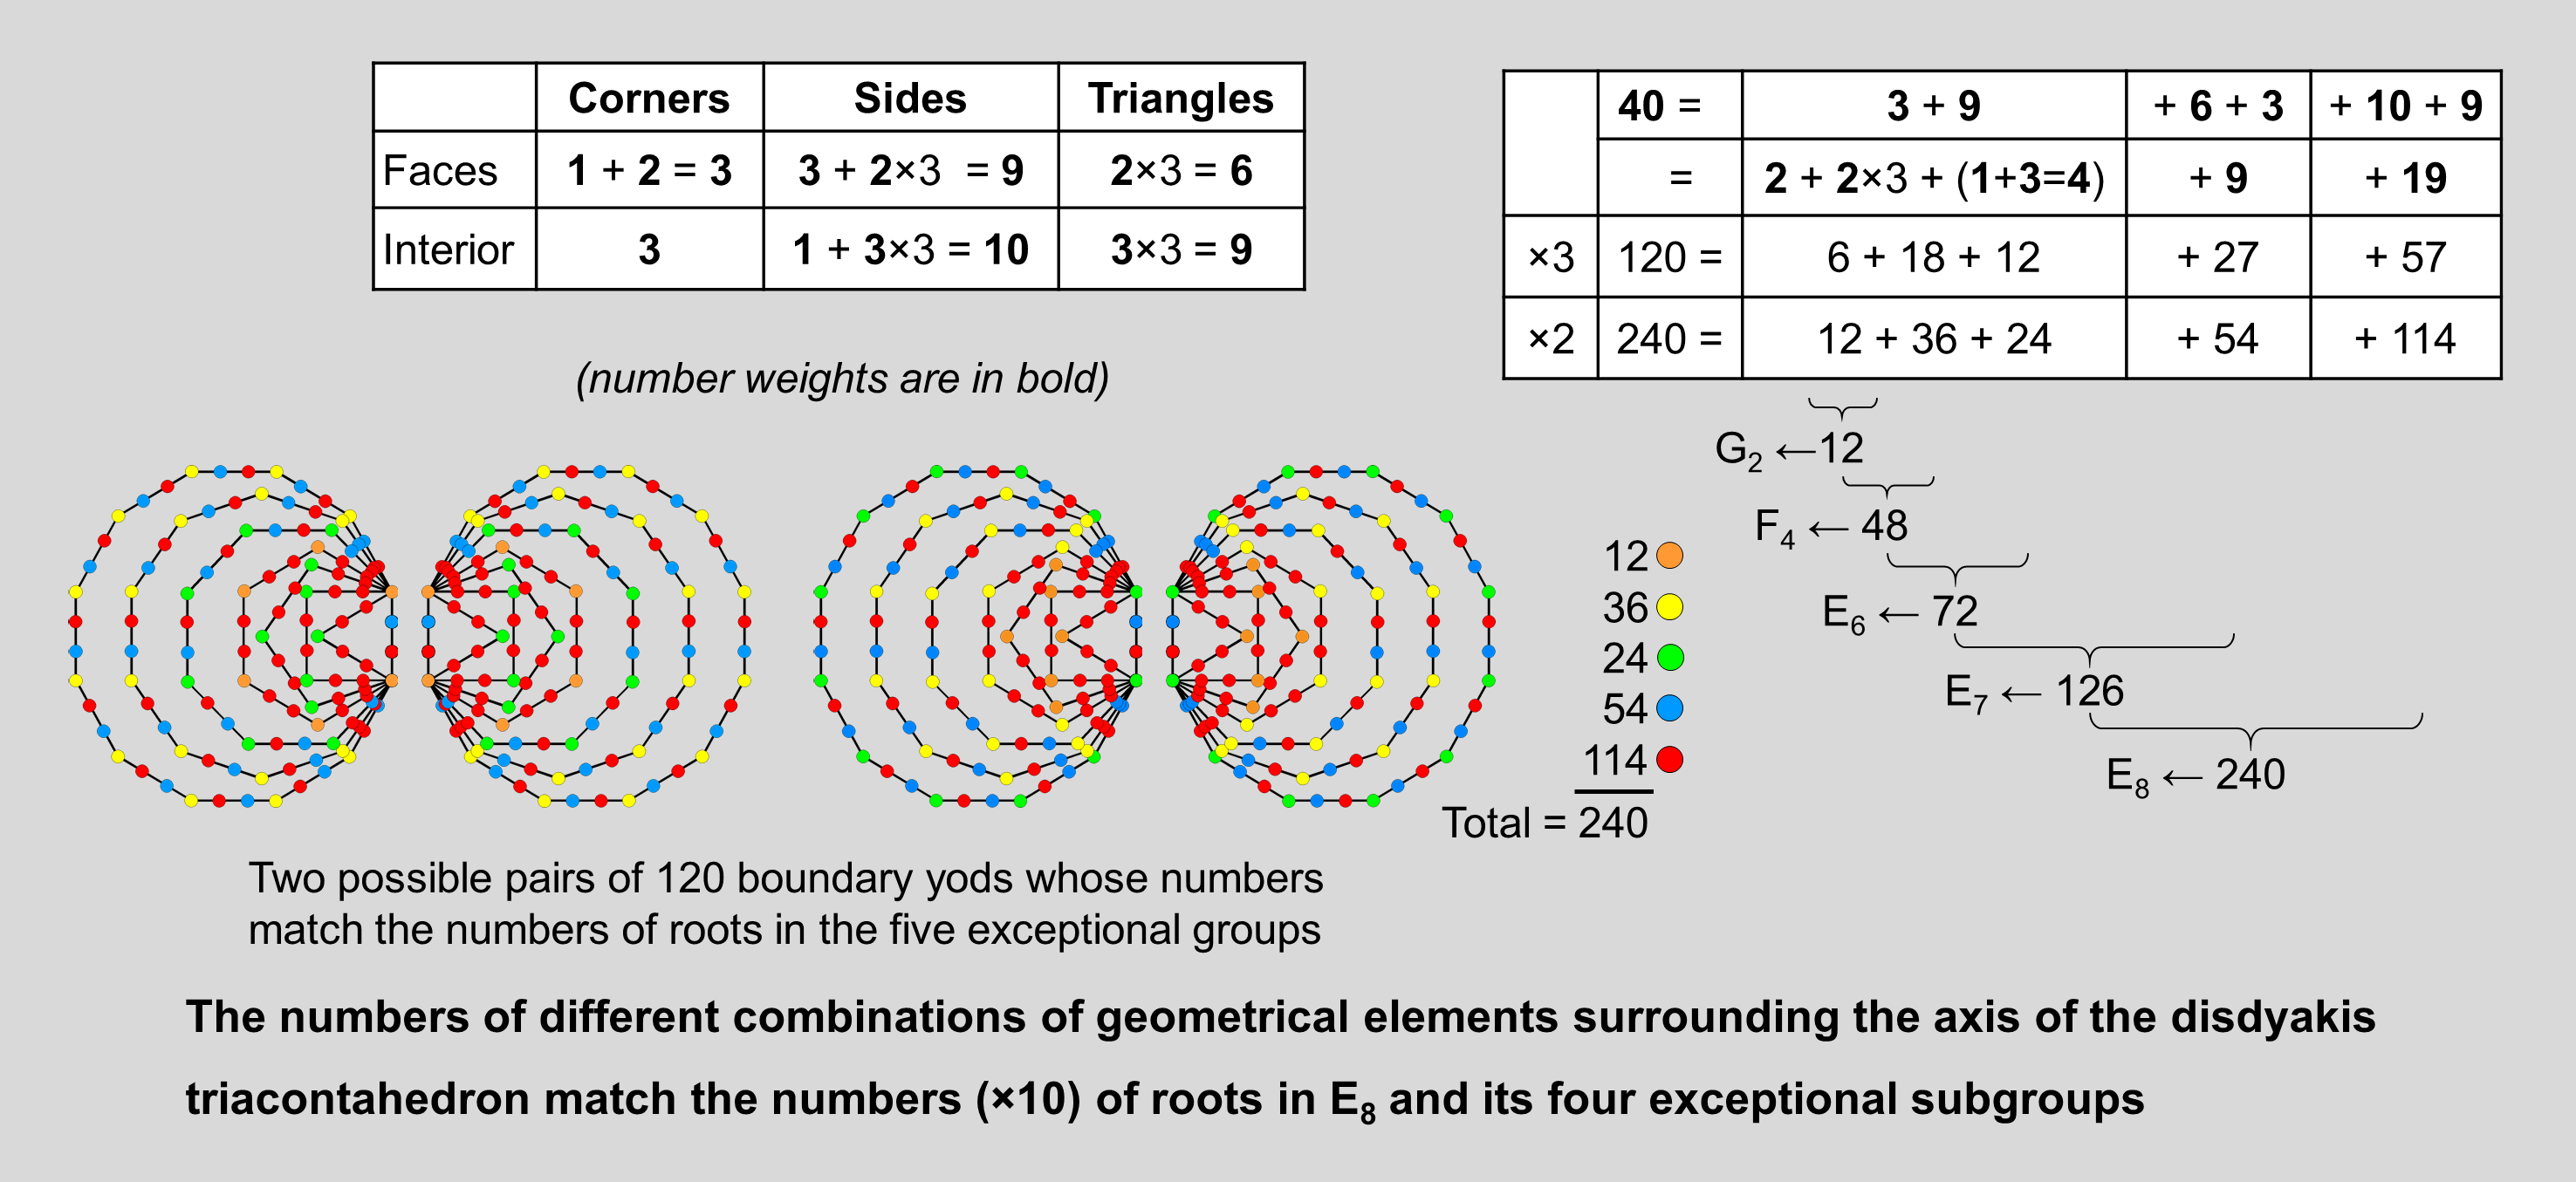 Number weights match orders of E8 and its exceptional subgroups